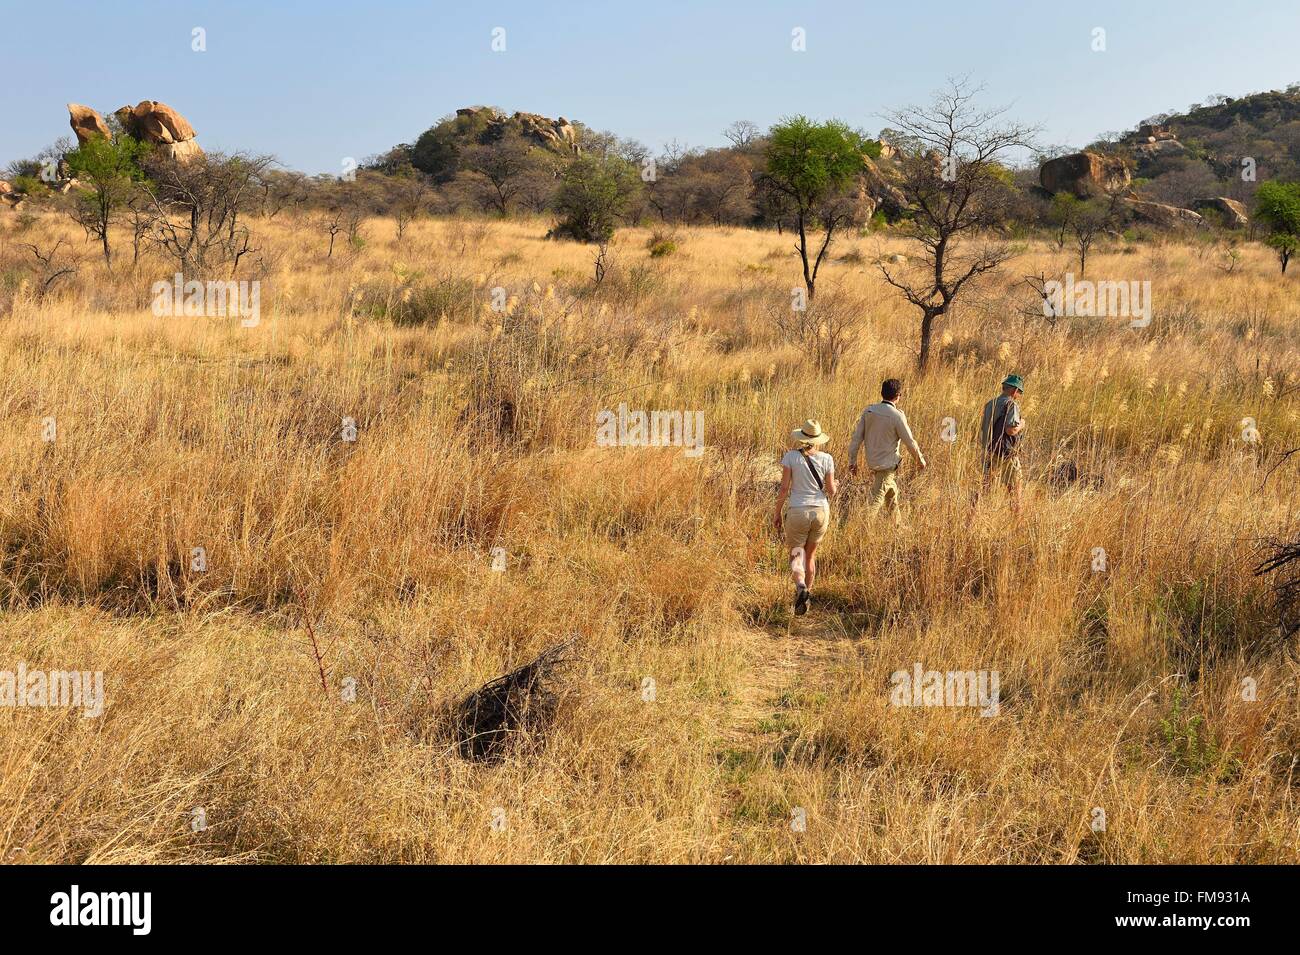 Zimbabwe, Matabeleland South Province, Matobo or Matopos Hills National Park, listed as World Heritage by UNESCO, walking safari in search of White Rhinoceros (Ceratotherium simum) Stock Photo